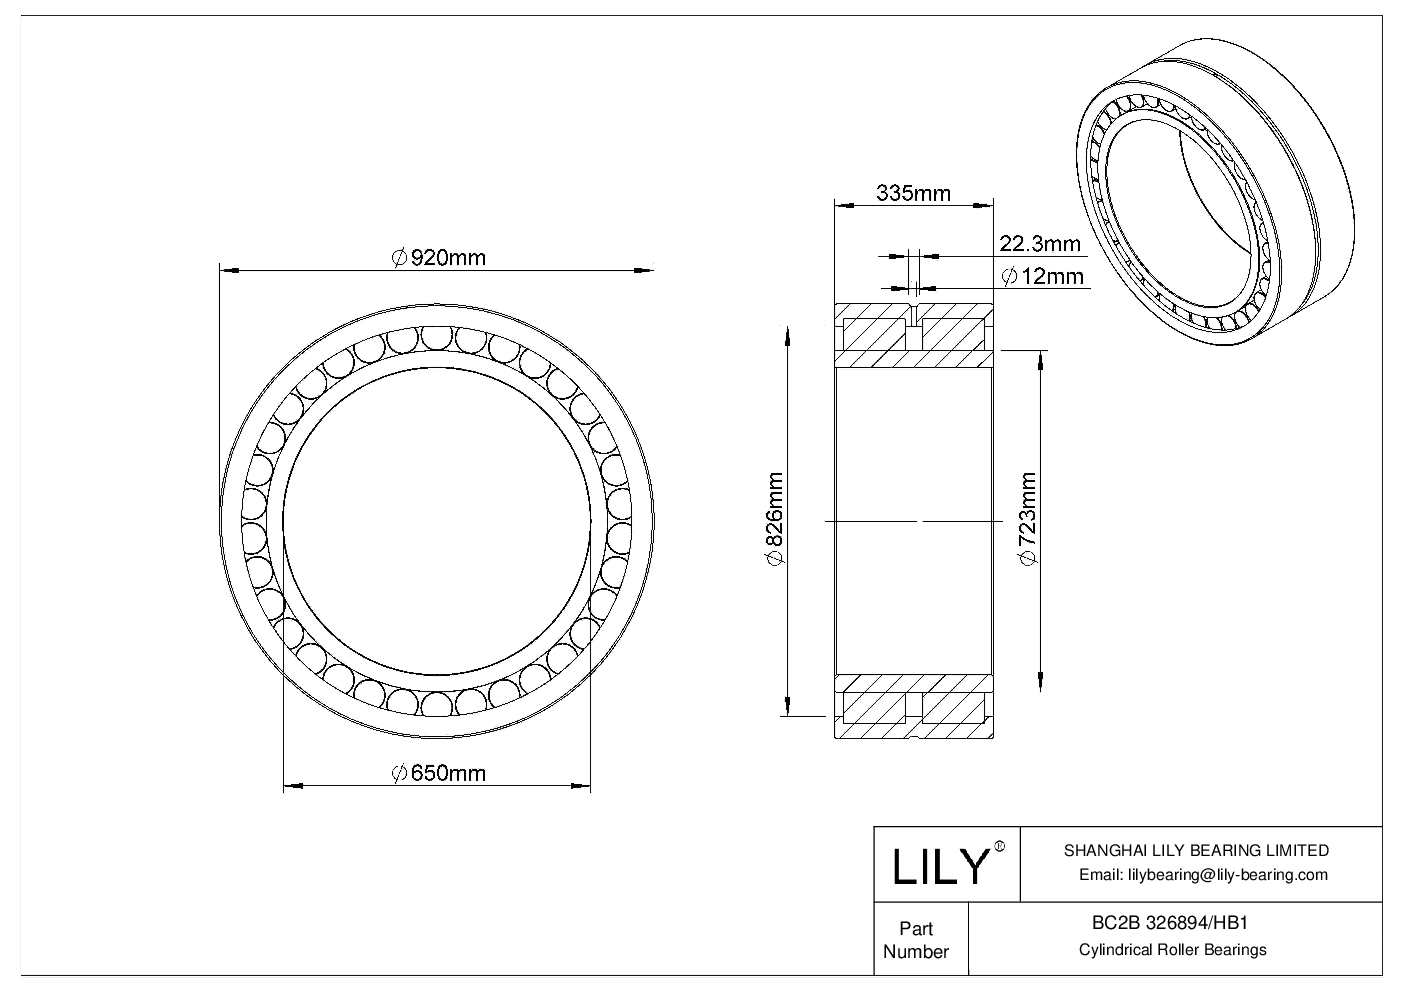 BC2B 326894/HB1 Double Row Cylindrical Roller Bearings cad drawing